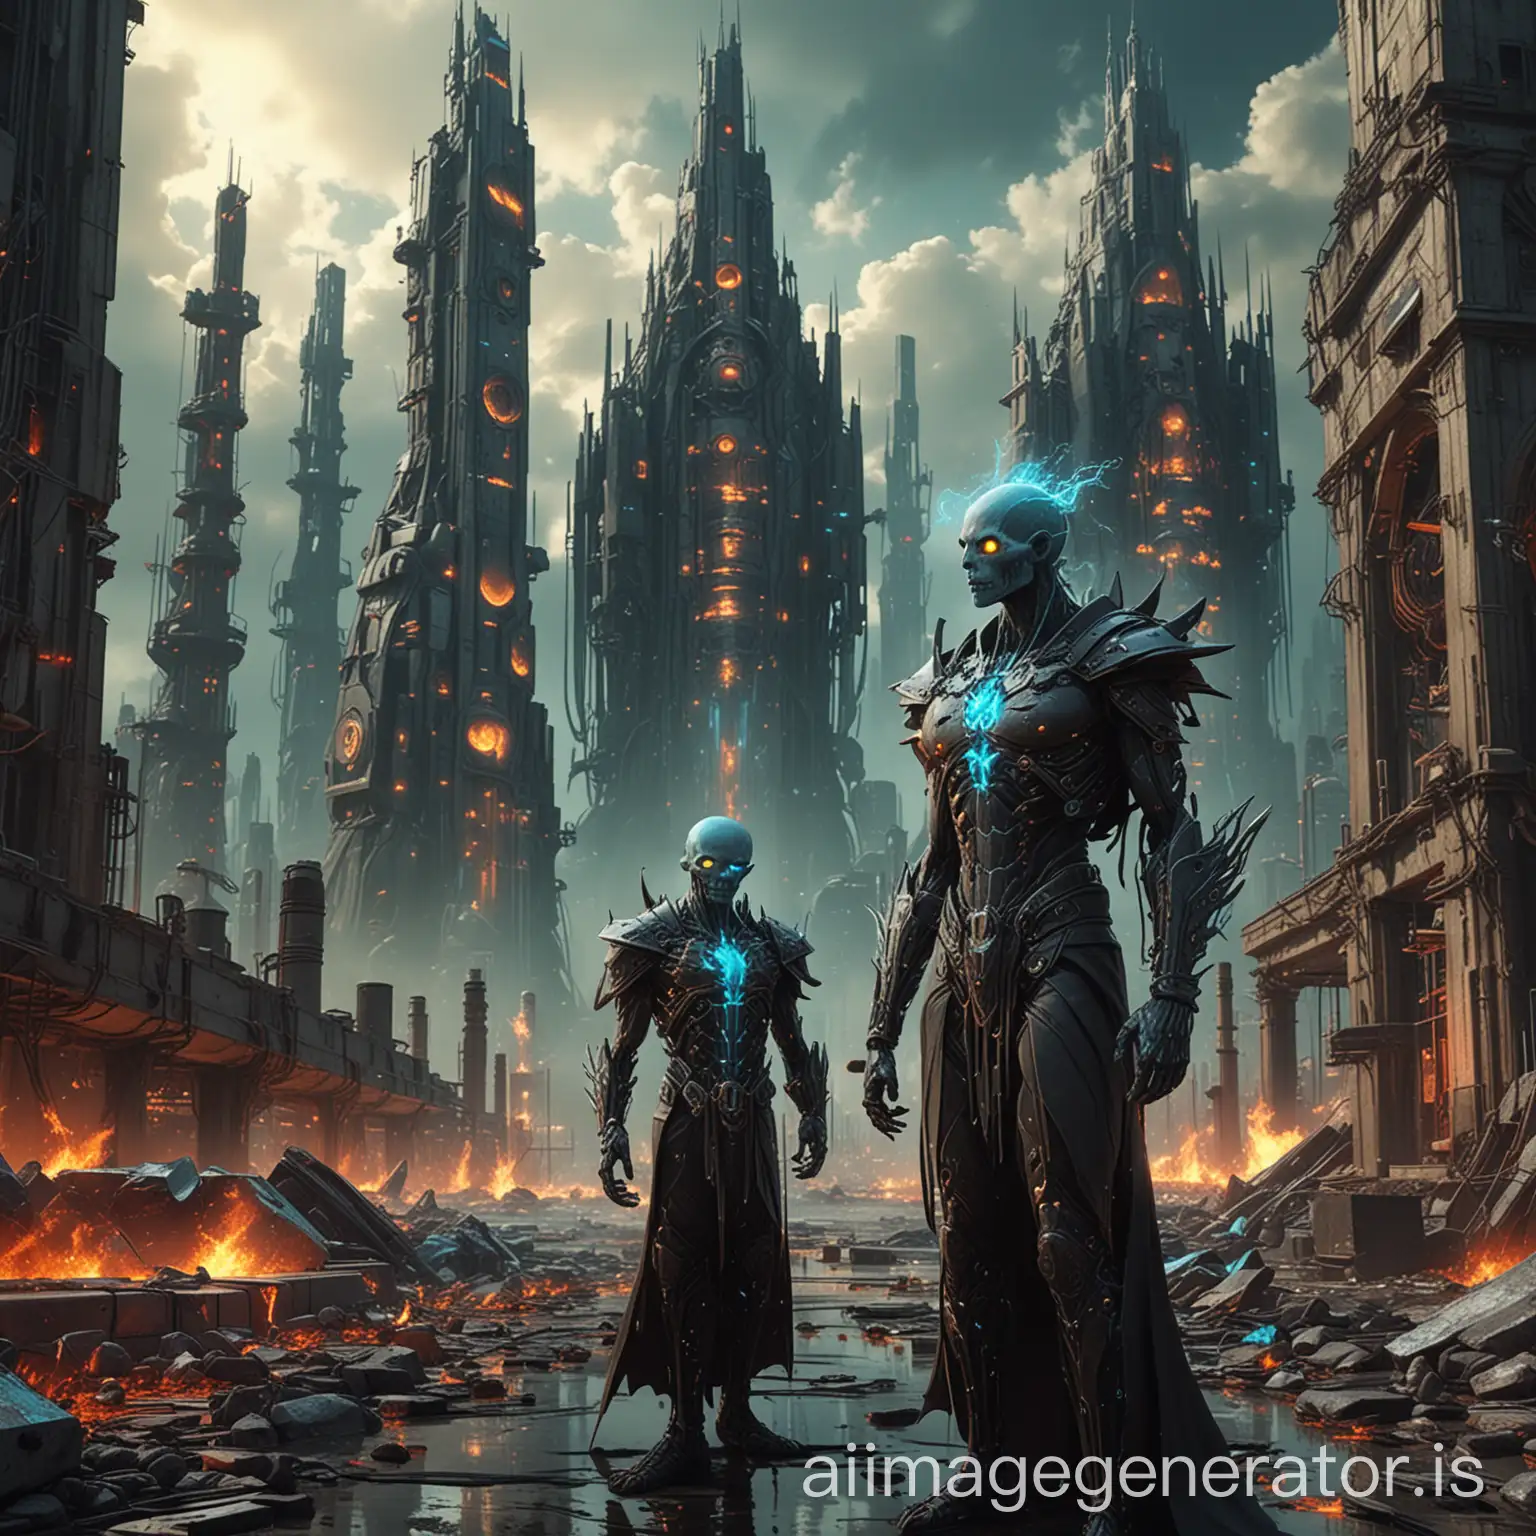 A surreal and highly detailed image featuring  necromancer, each with distinct facial features shaped like trapezoids. One necromancer emits aqua-themed energy bolts, while the other emits neon-blue energy bolts. They stand in front of a futuristic cityscape, complete with towering concrete buildings and distillation petrochemical columns, with a palette dominated by red and acid yellow hues. The atmosphere is enhanced by a photo filter that displays black clouds, and the image employs advanced Ray Tracing Global Illumination technology, Optics, Scattering, and Glow effects to create an insanely detailed and intricate scene. 